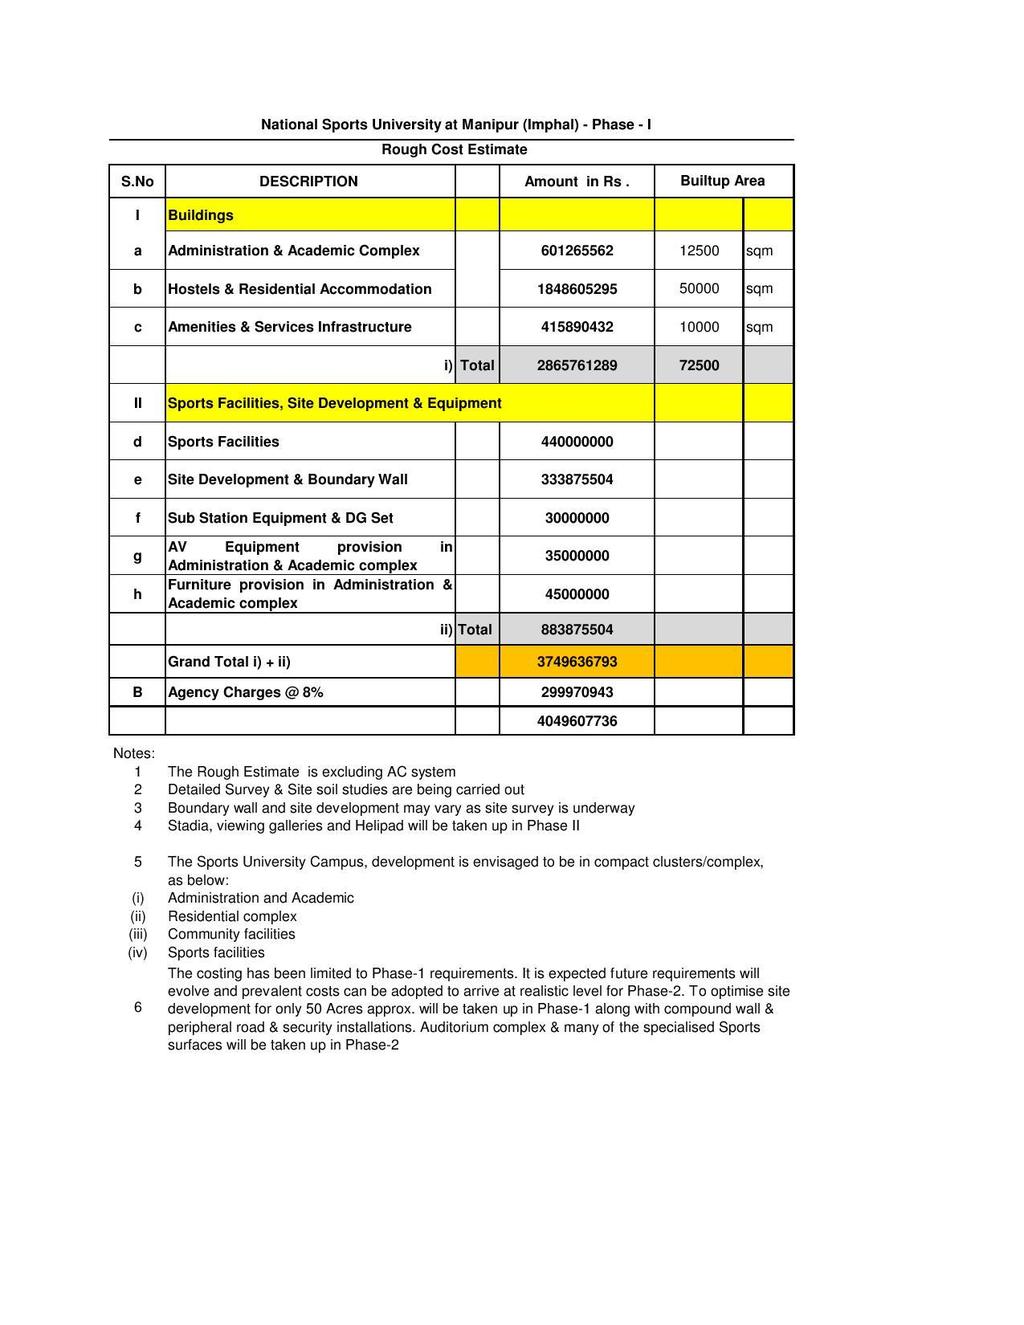 Annexure 1 Detailed Project Report for setting